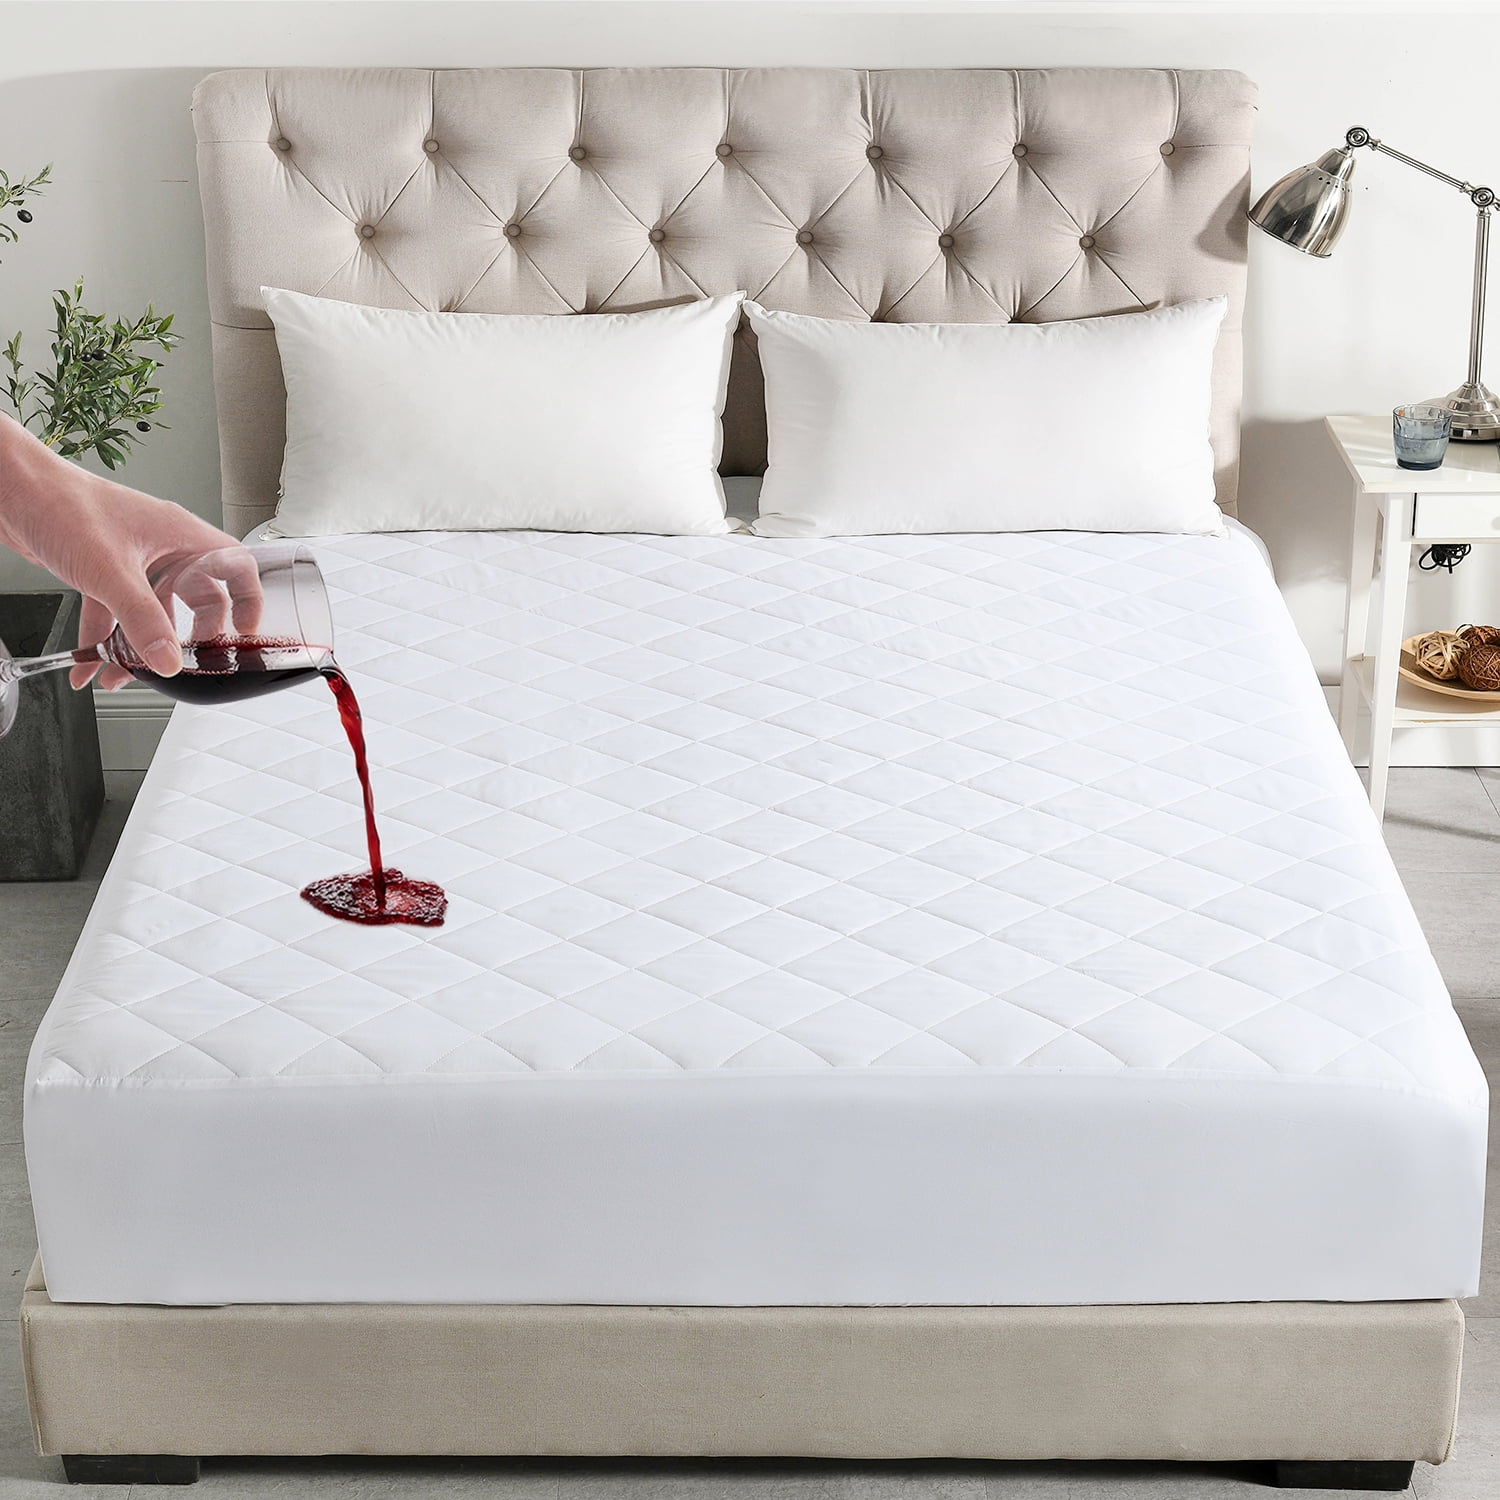 King Size Waterproof Mattress Protector Bed Topper Cover Hypoallergenic Soft 